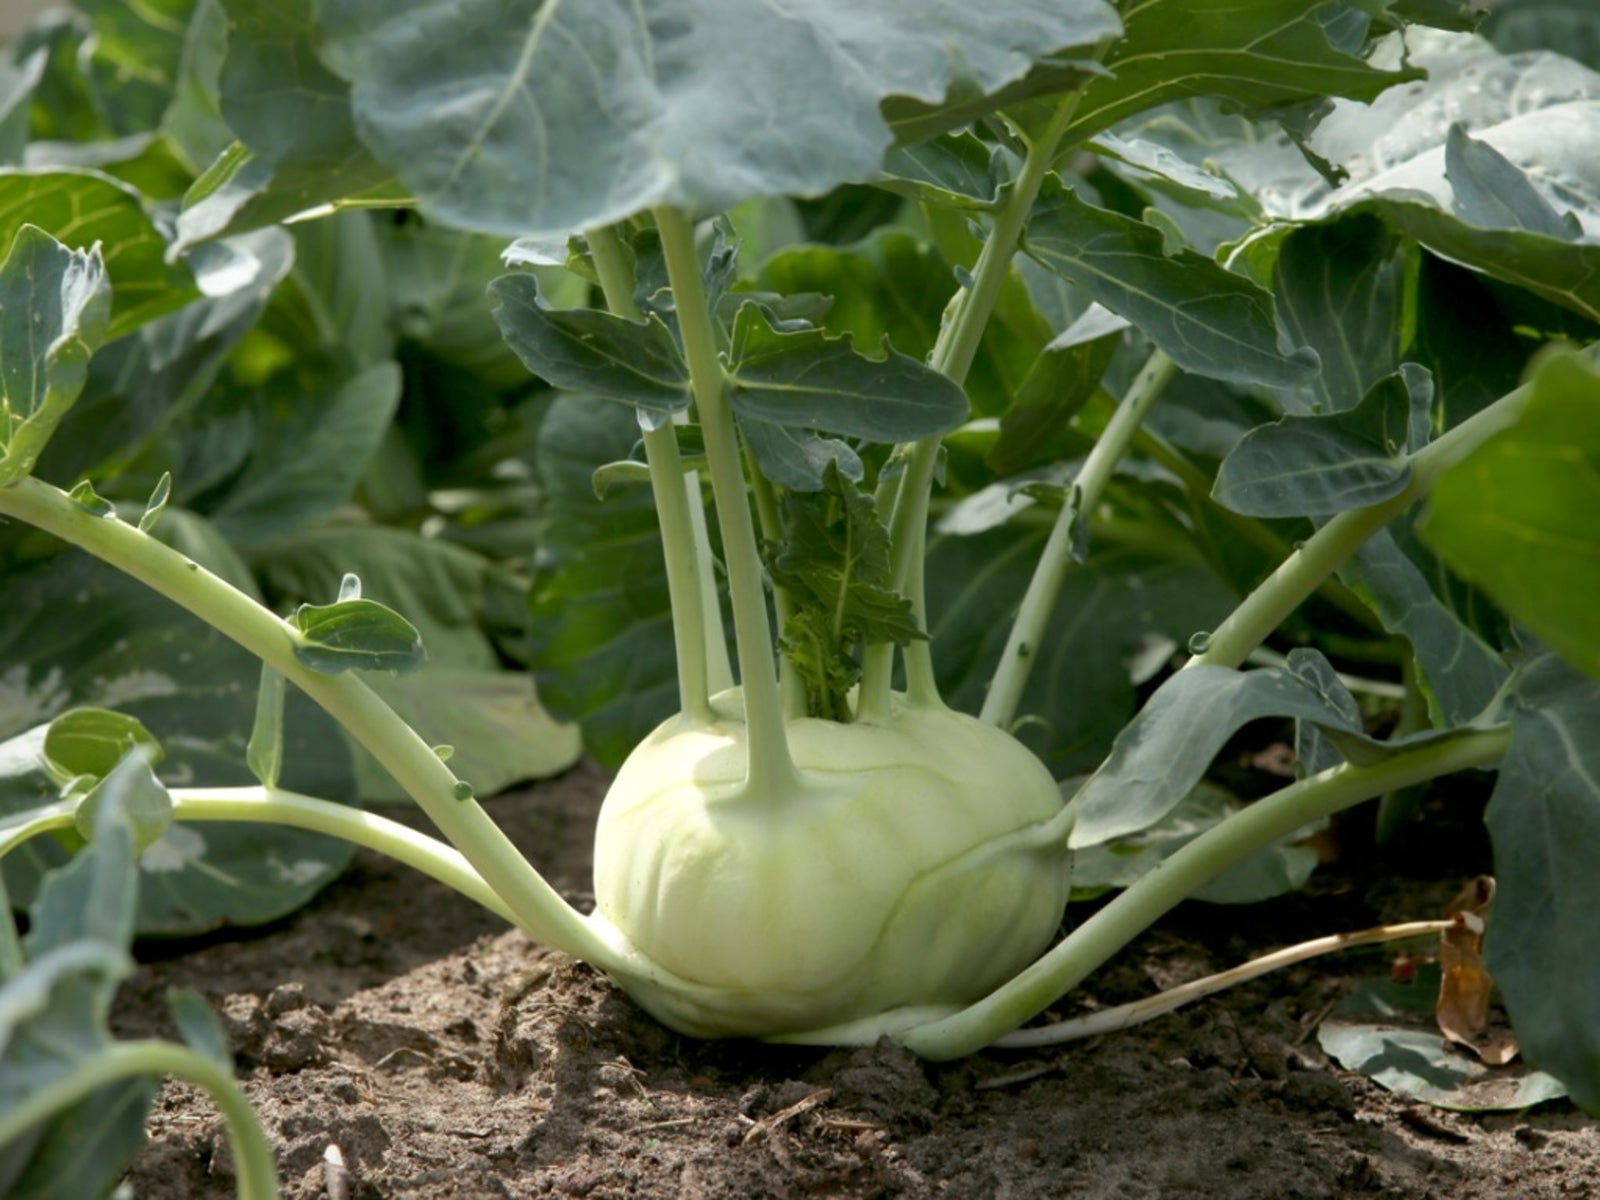 Learn How To Grow Kohlrabi In The Garden | Gardening Know How